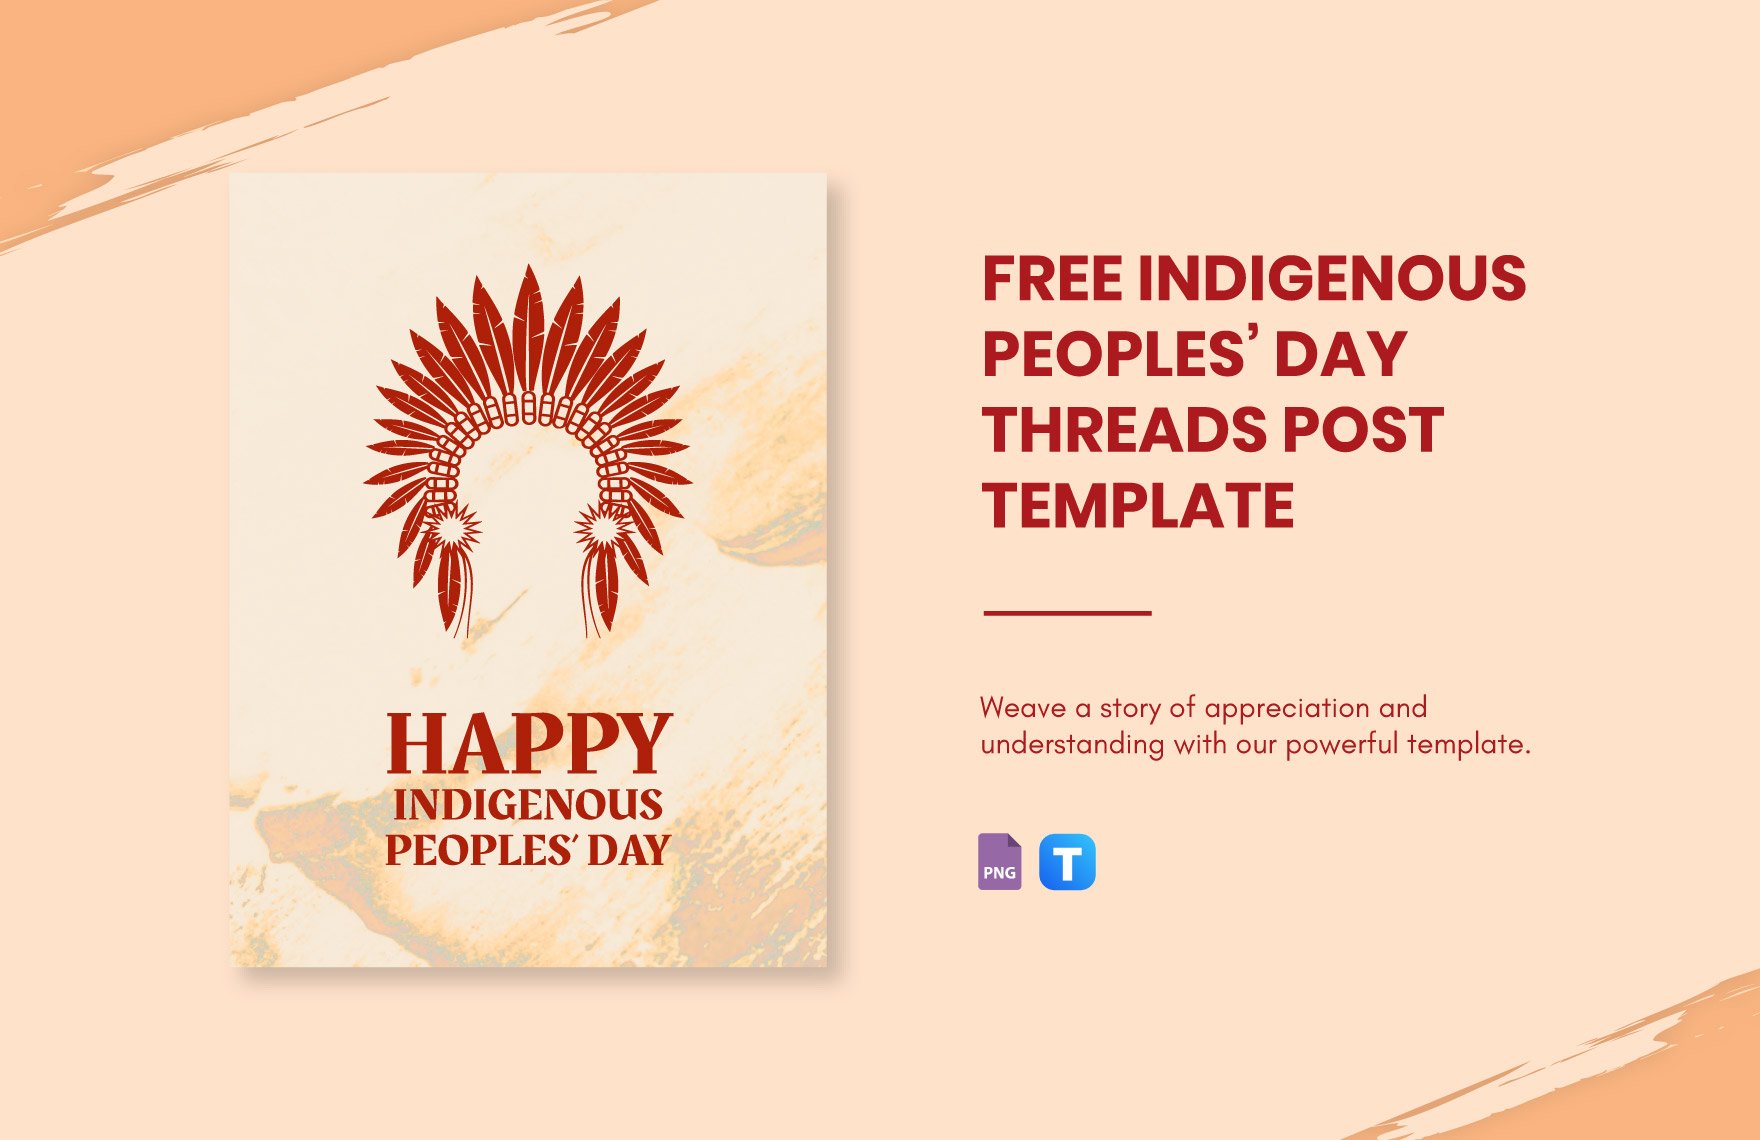 Free Indigenous Peoples' Day Threads Post Template